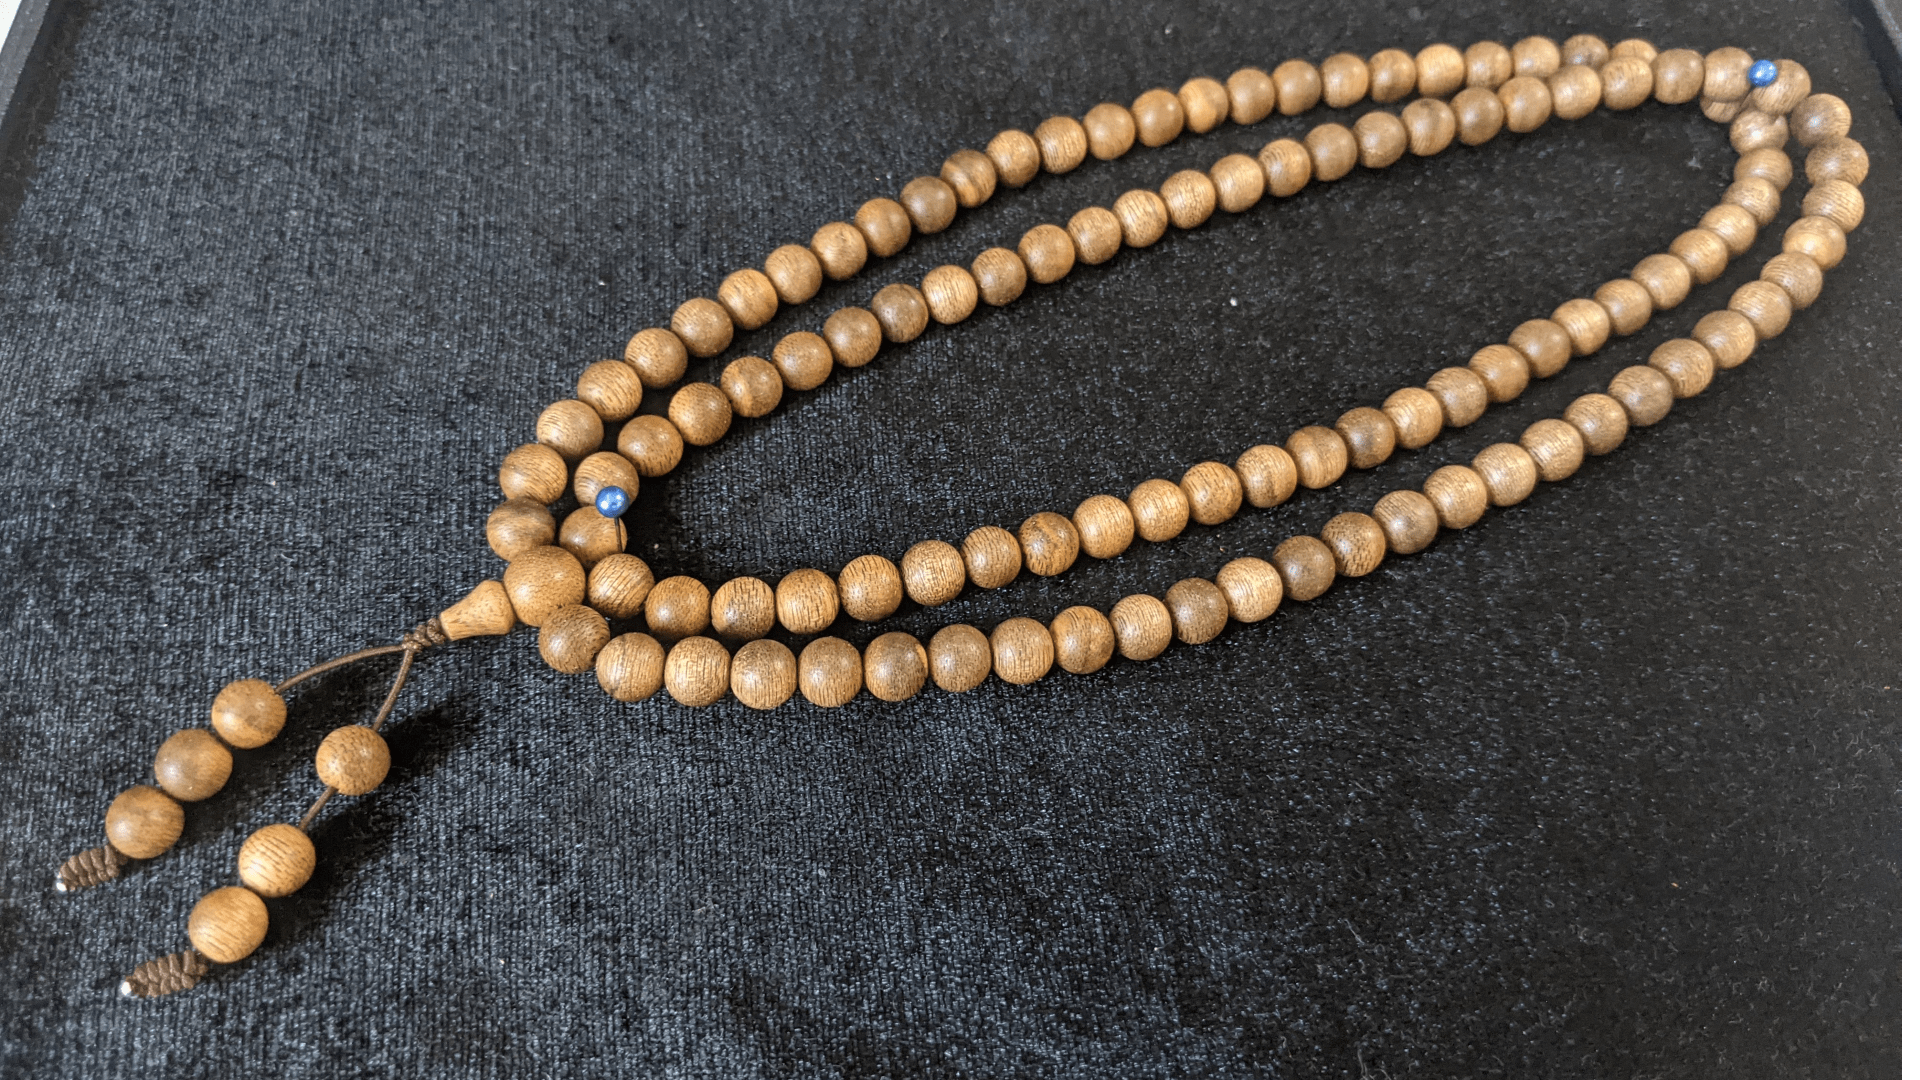 The GGG, Premium Cultivated Agarwood 108 Mala and/or Bracelet - Cultivated beads with wild agarwood quality - 8mm 108 Cultivated Agarwood japamala / mala (114 beads total) 15g